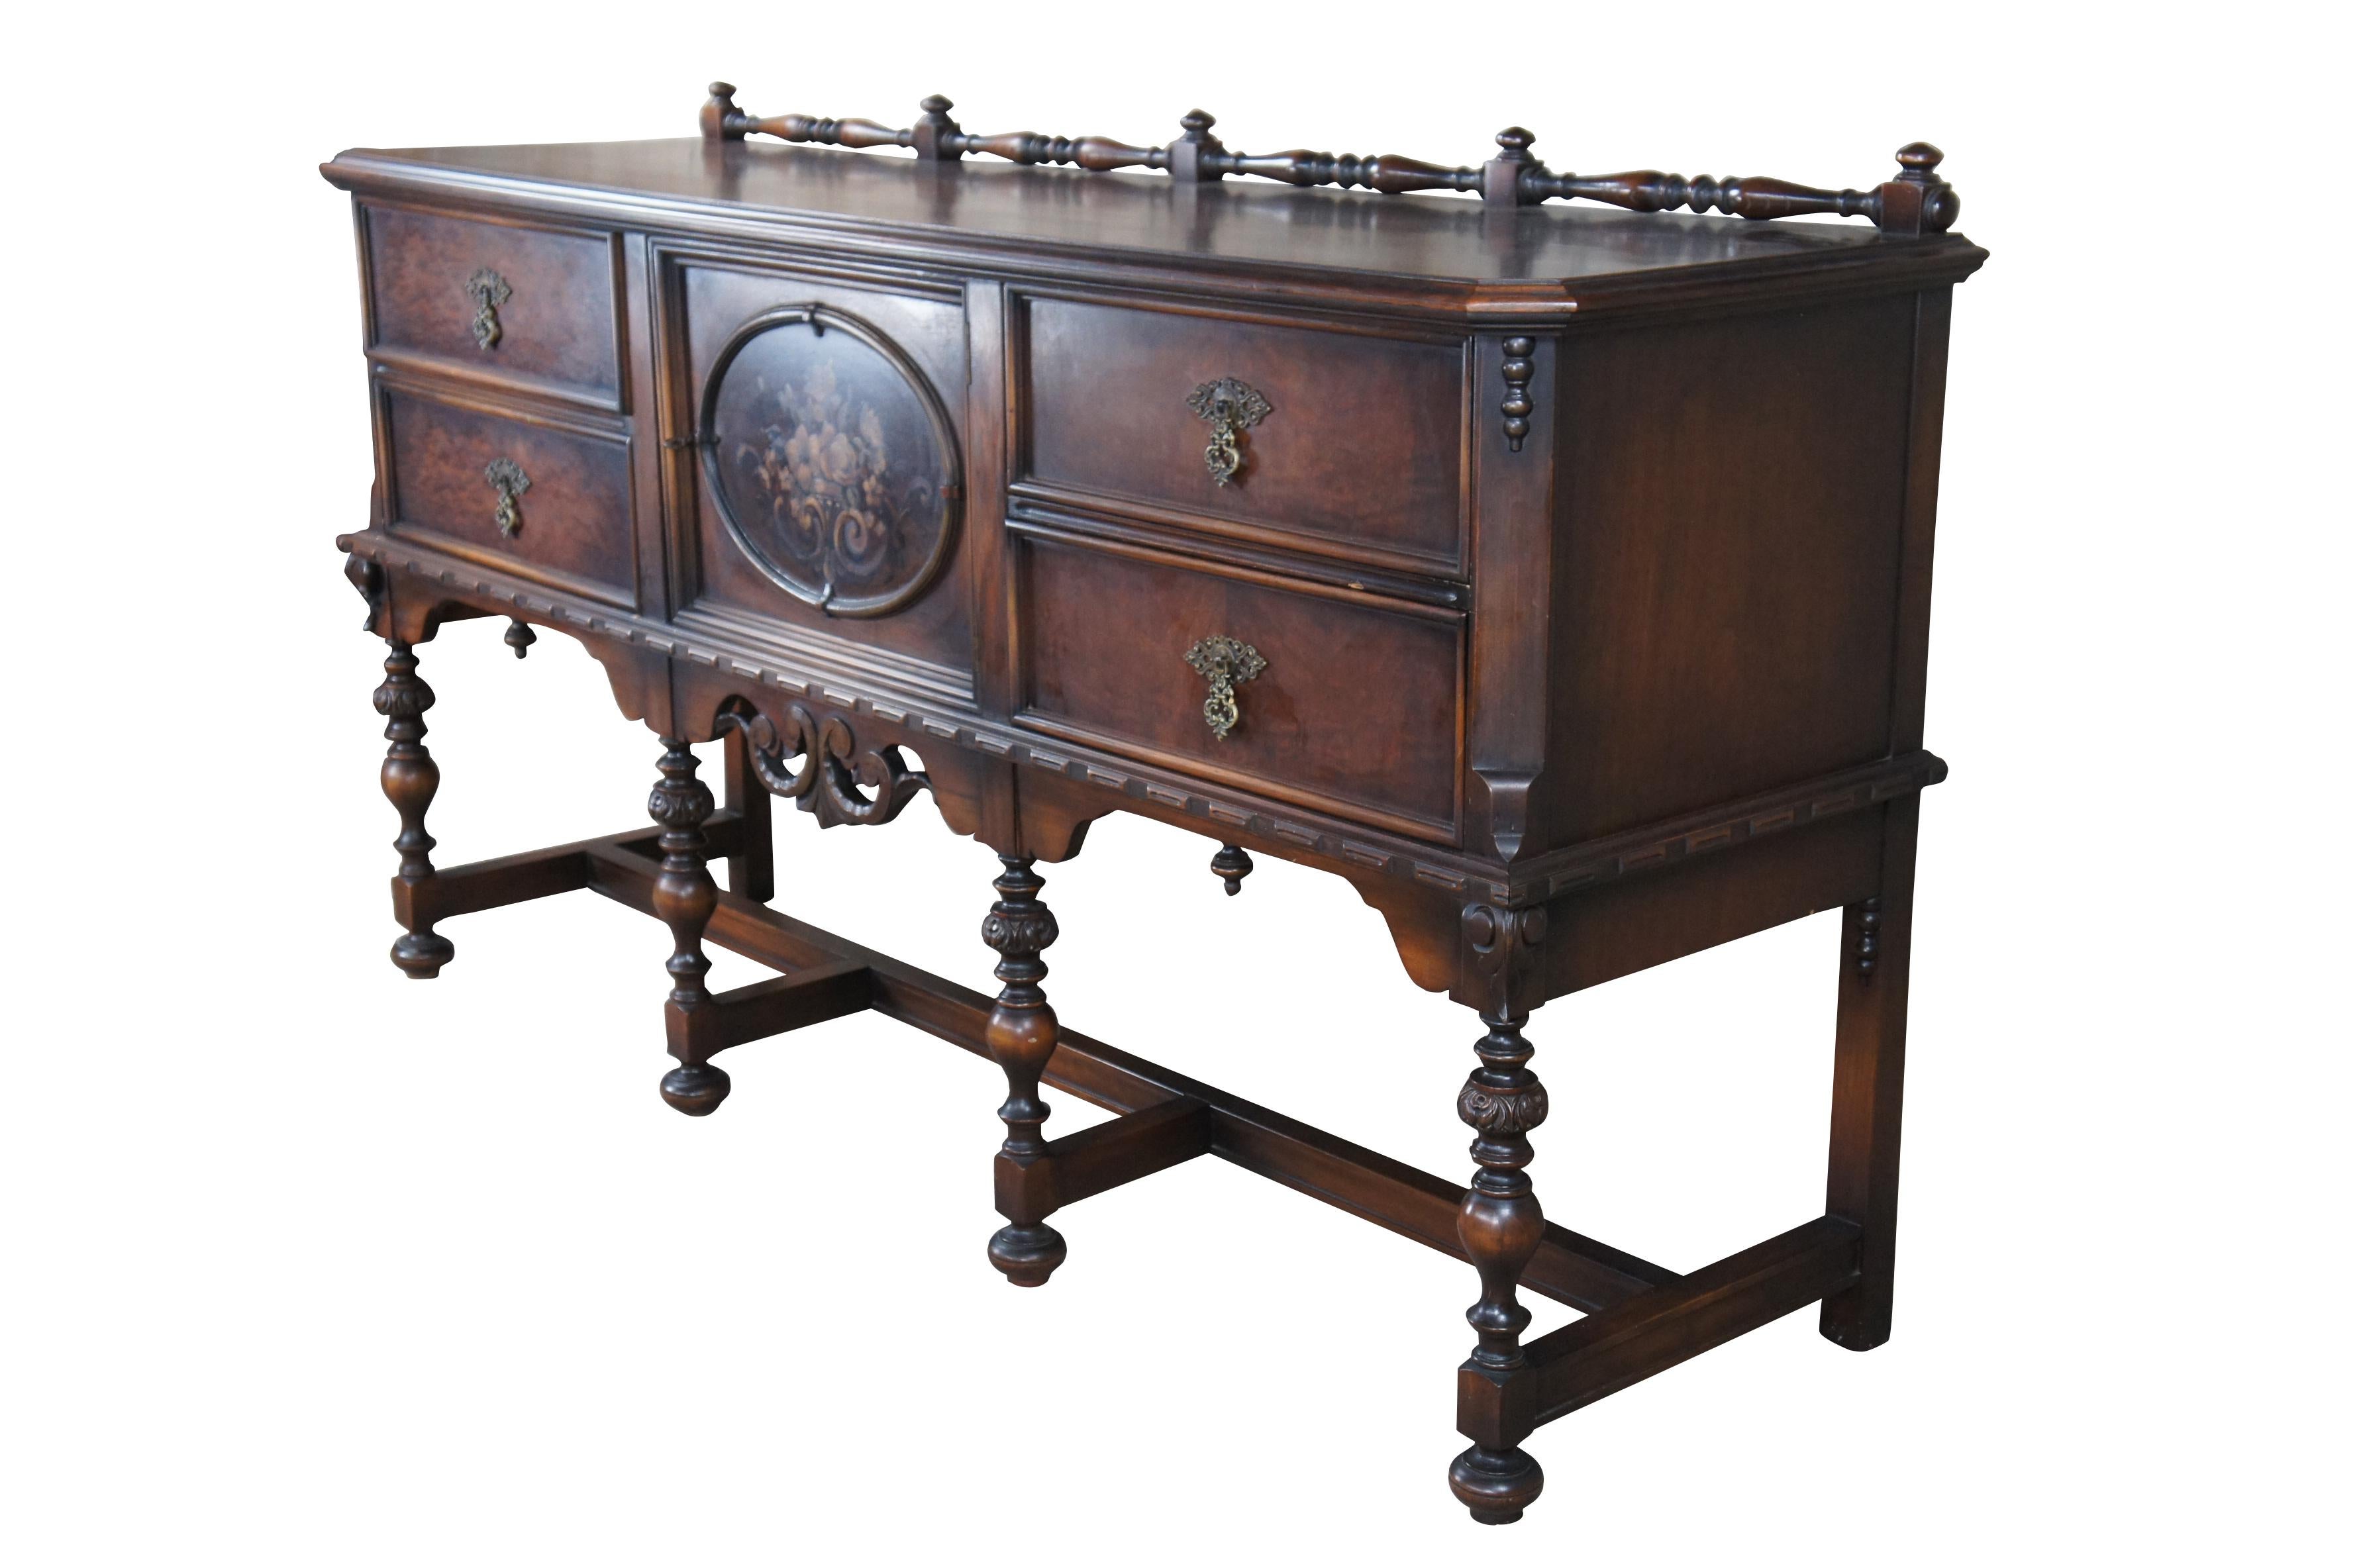 Antique Life Time Furniture early 20th century buffet, sideboard, console or credenza.  Drawing inspiration from  Jacobean, Gothic and Spanish styling.  Made of walnut featuring rectangular form with chamfered corners terminating into rams tongue. 